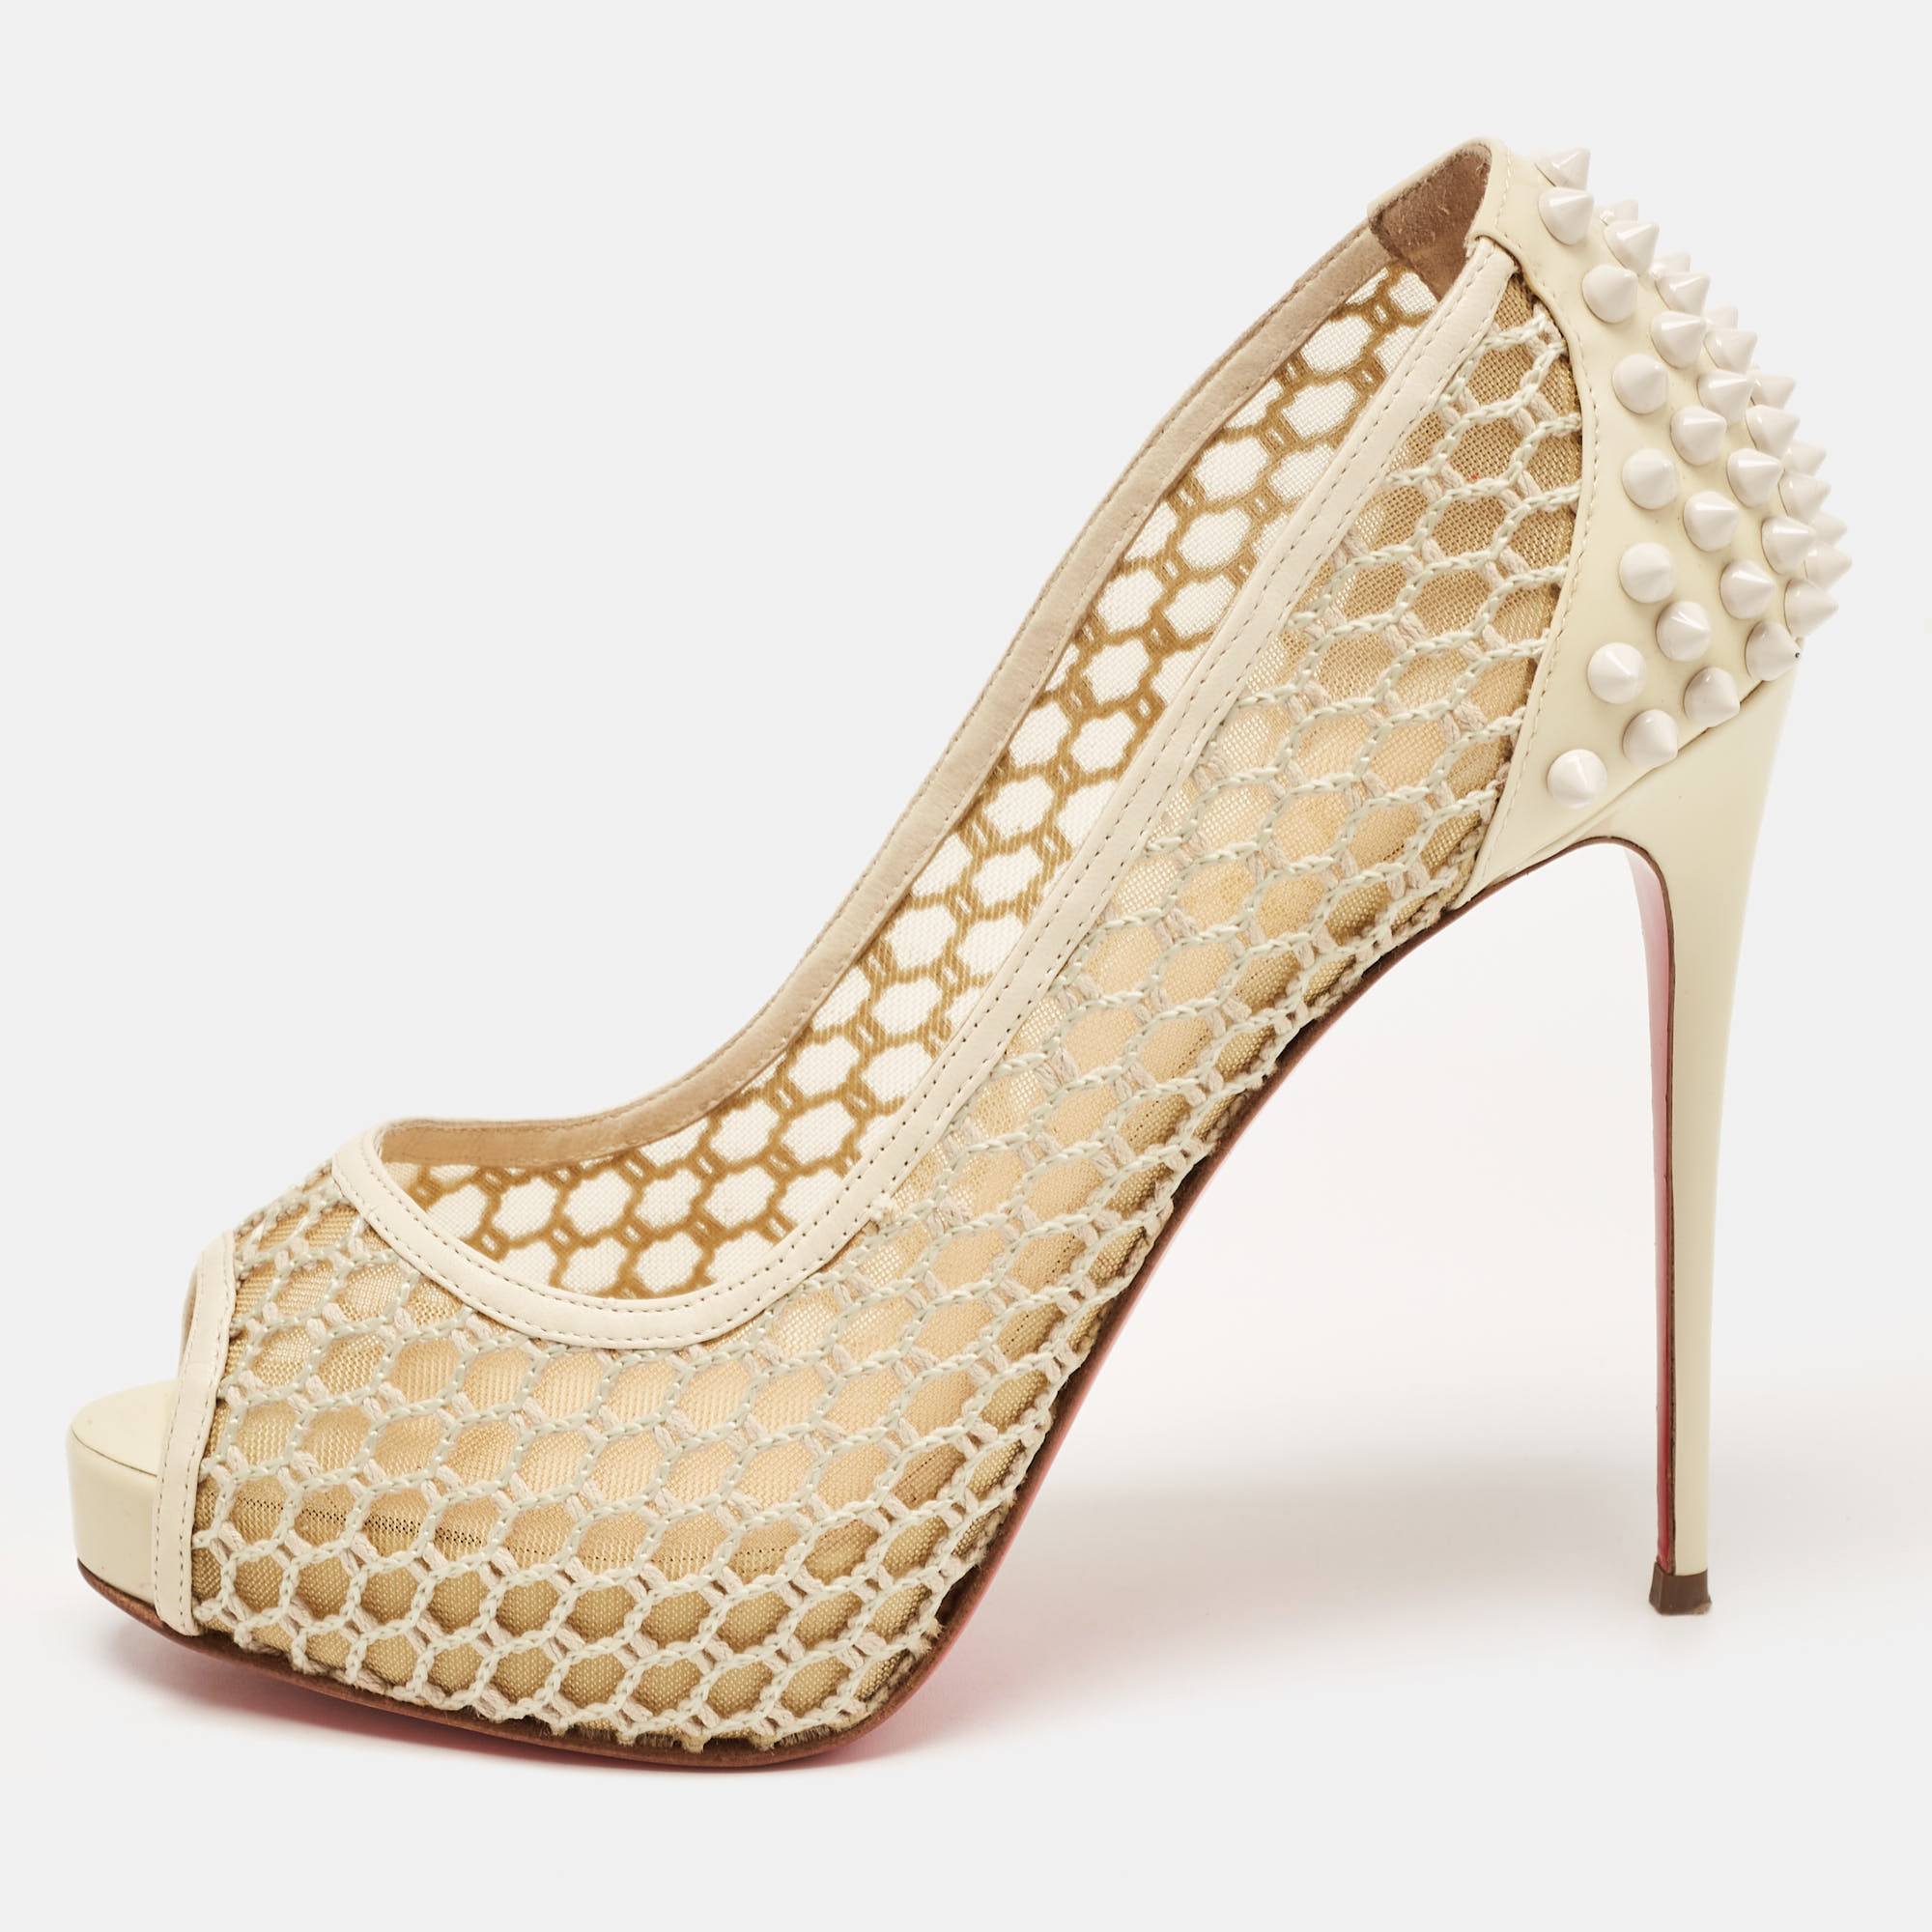 Christian Louboutin Cream Patent Leather And Mesh Guni Spiked Peep Toe Pumps Size 38